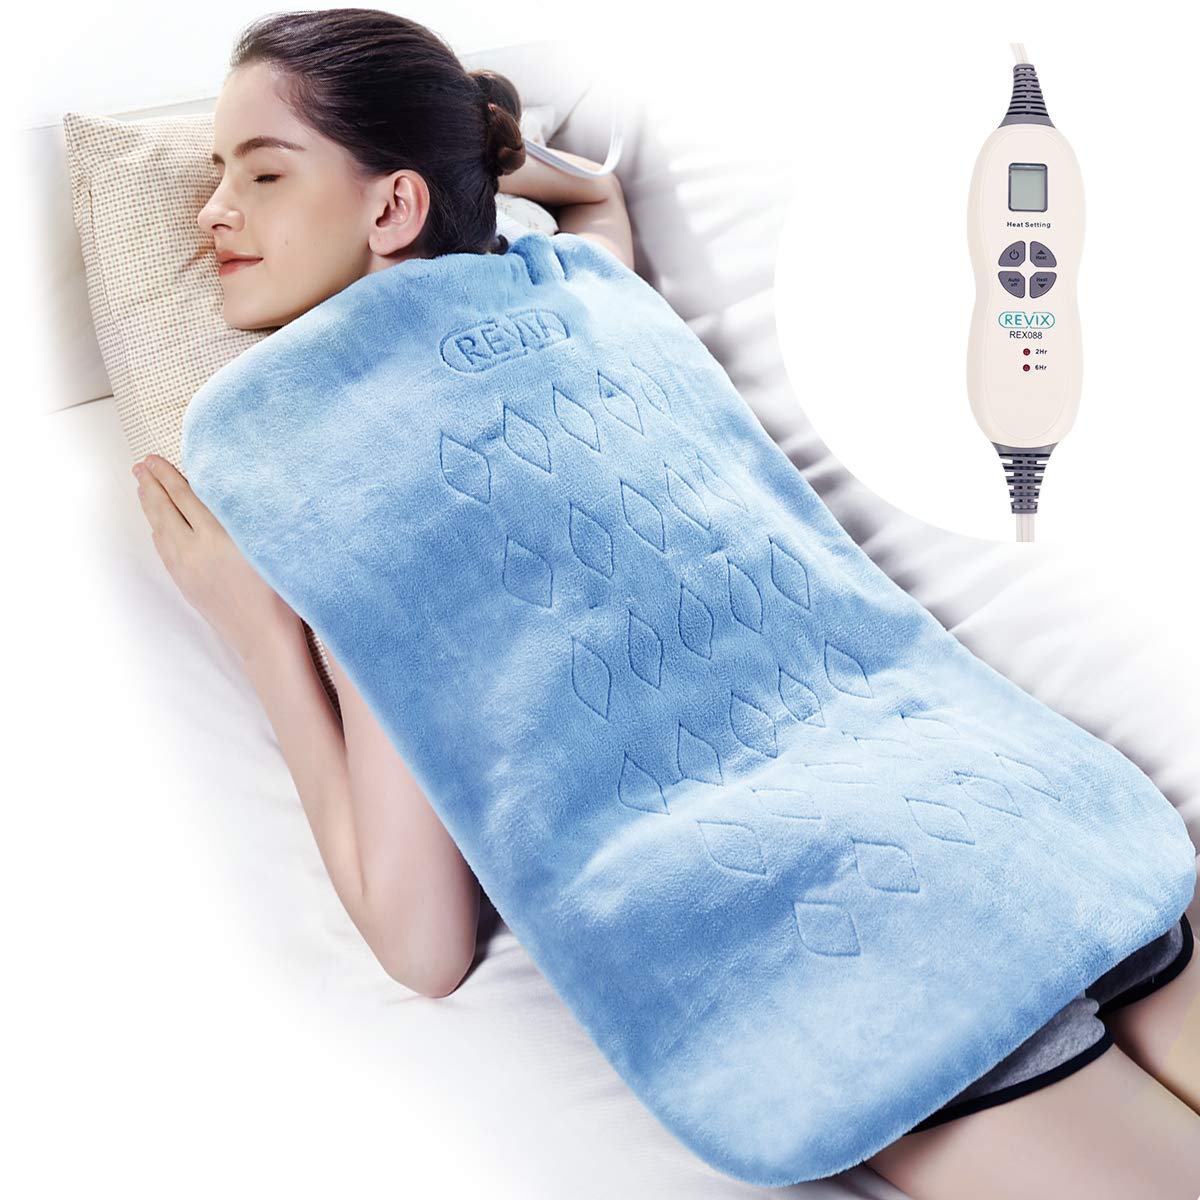 Woman holding a heating pad to her stomach